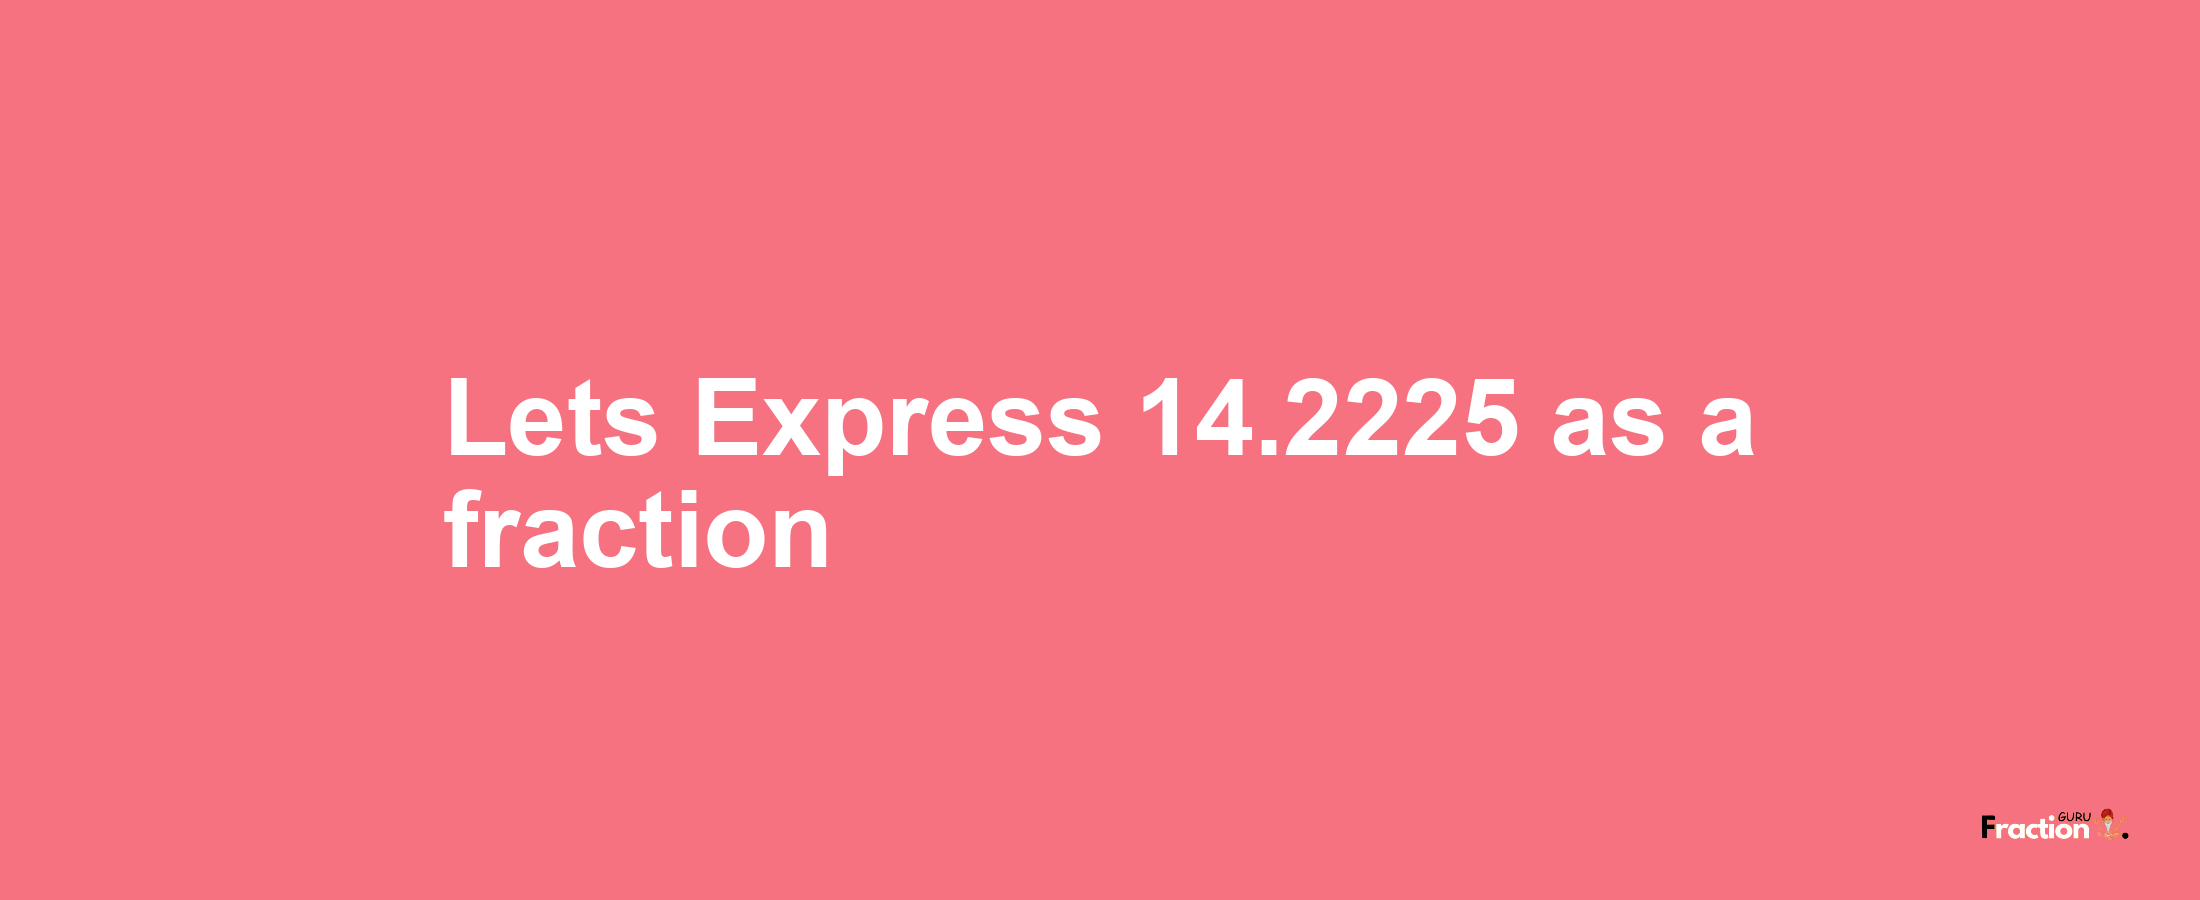 Lets Express 14.2225 as afraction